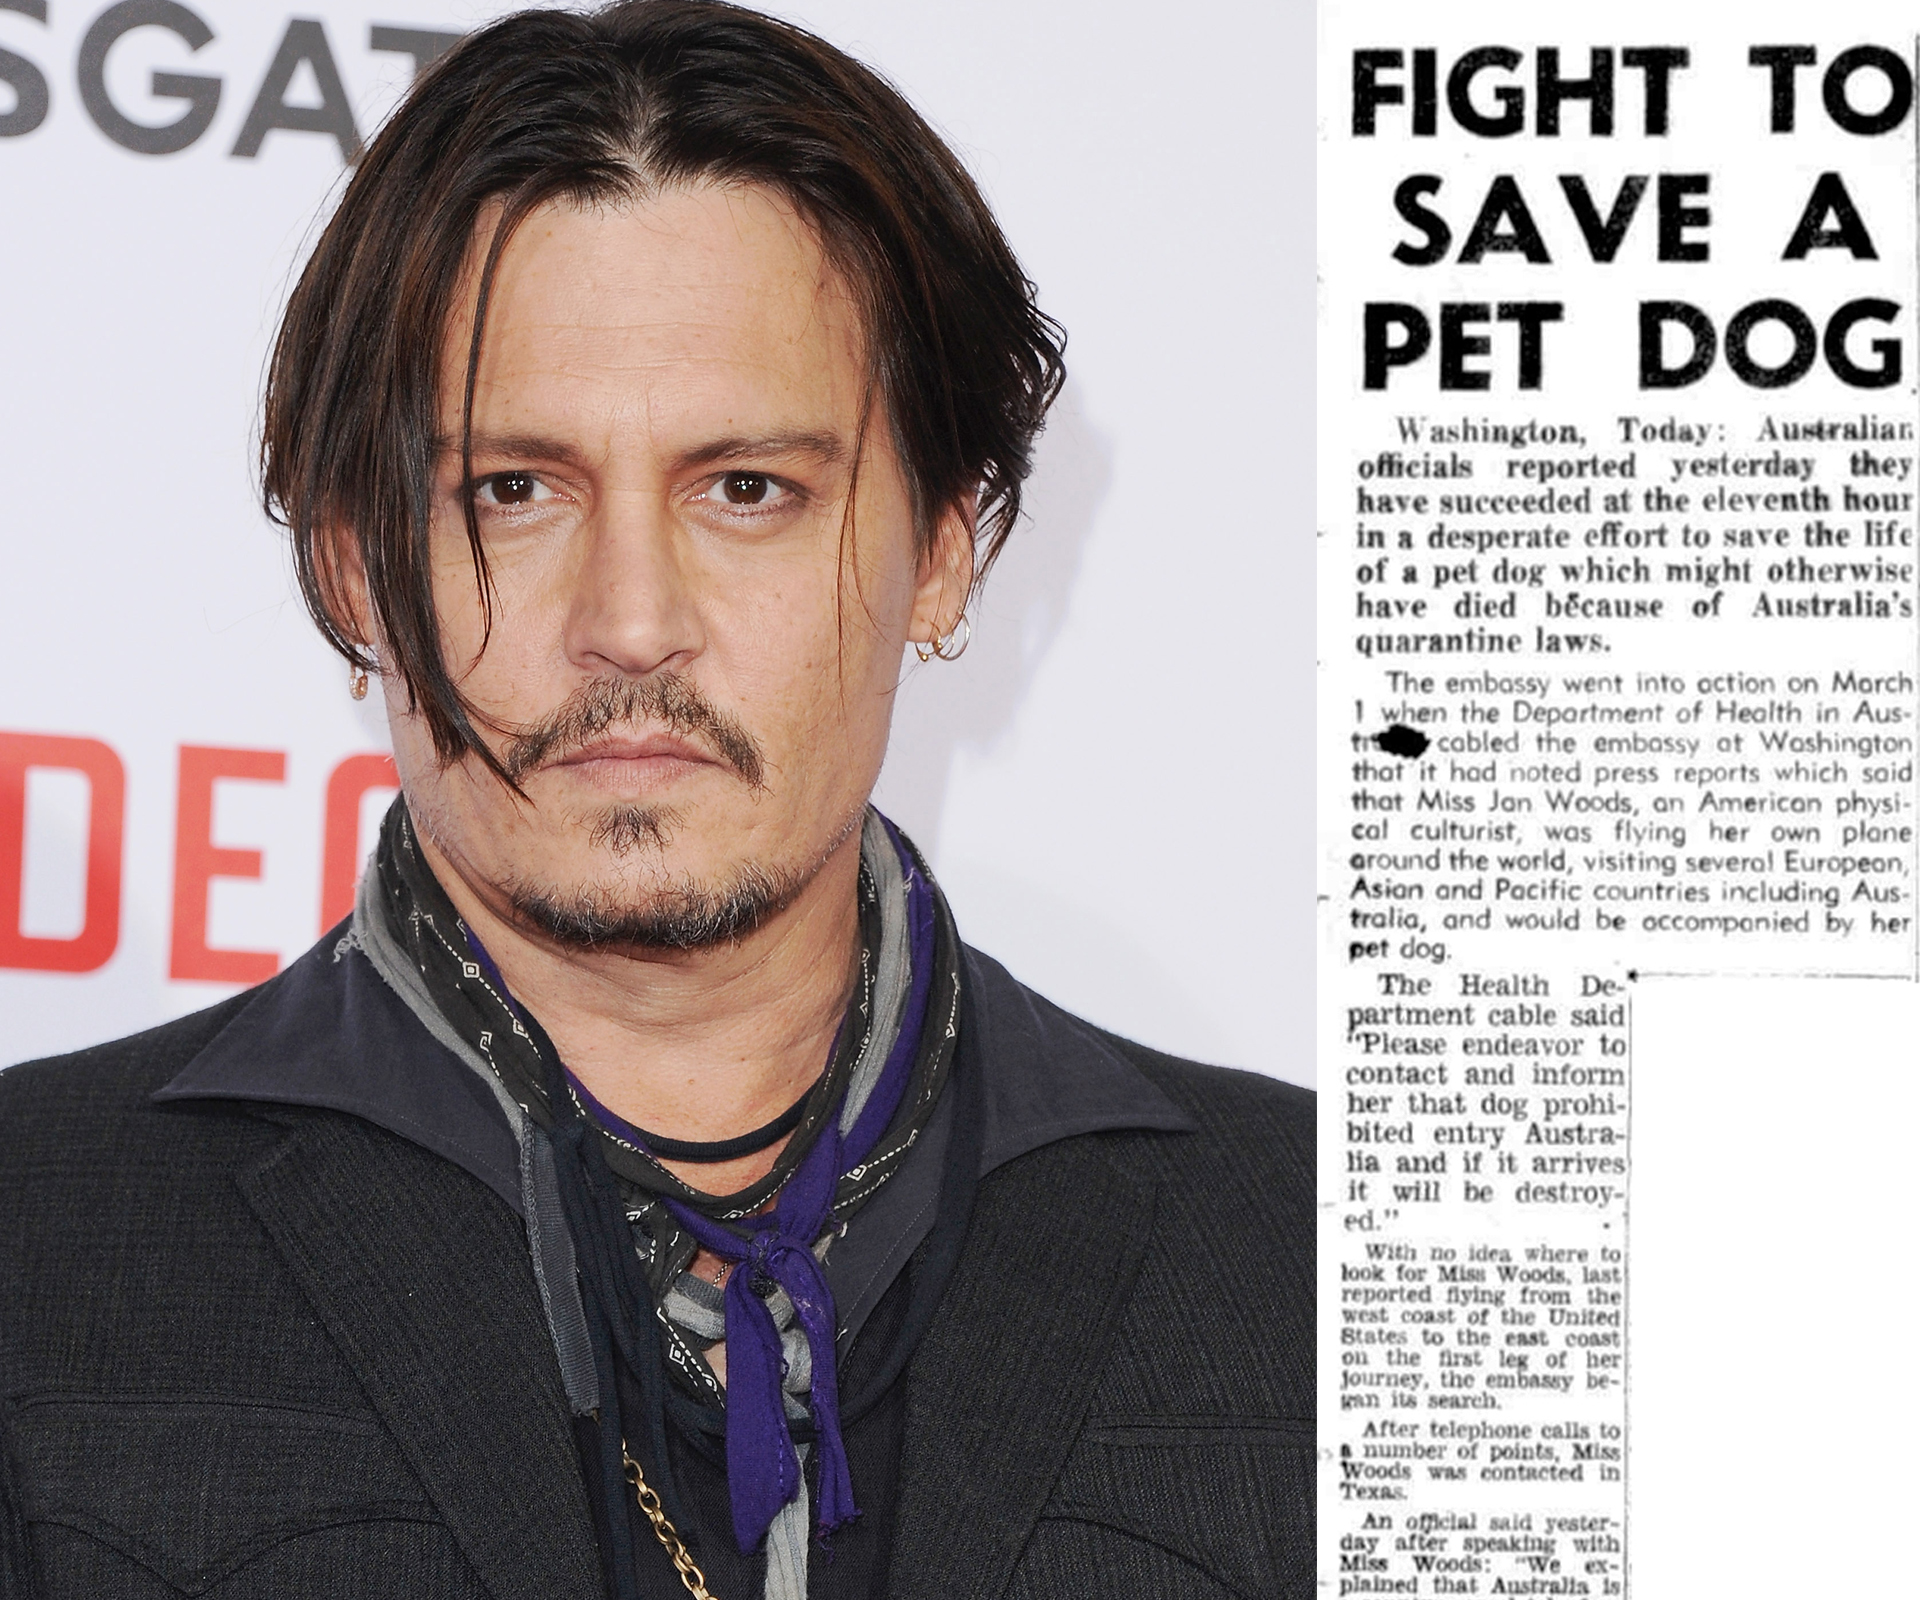 Johnny Depp’s Puppy-gate reminiscent of 1956 fight to save dog